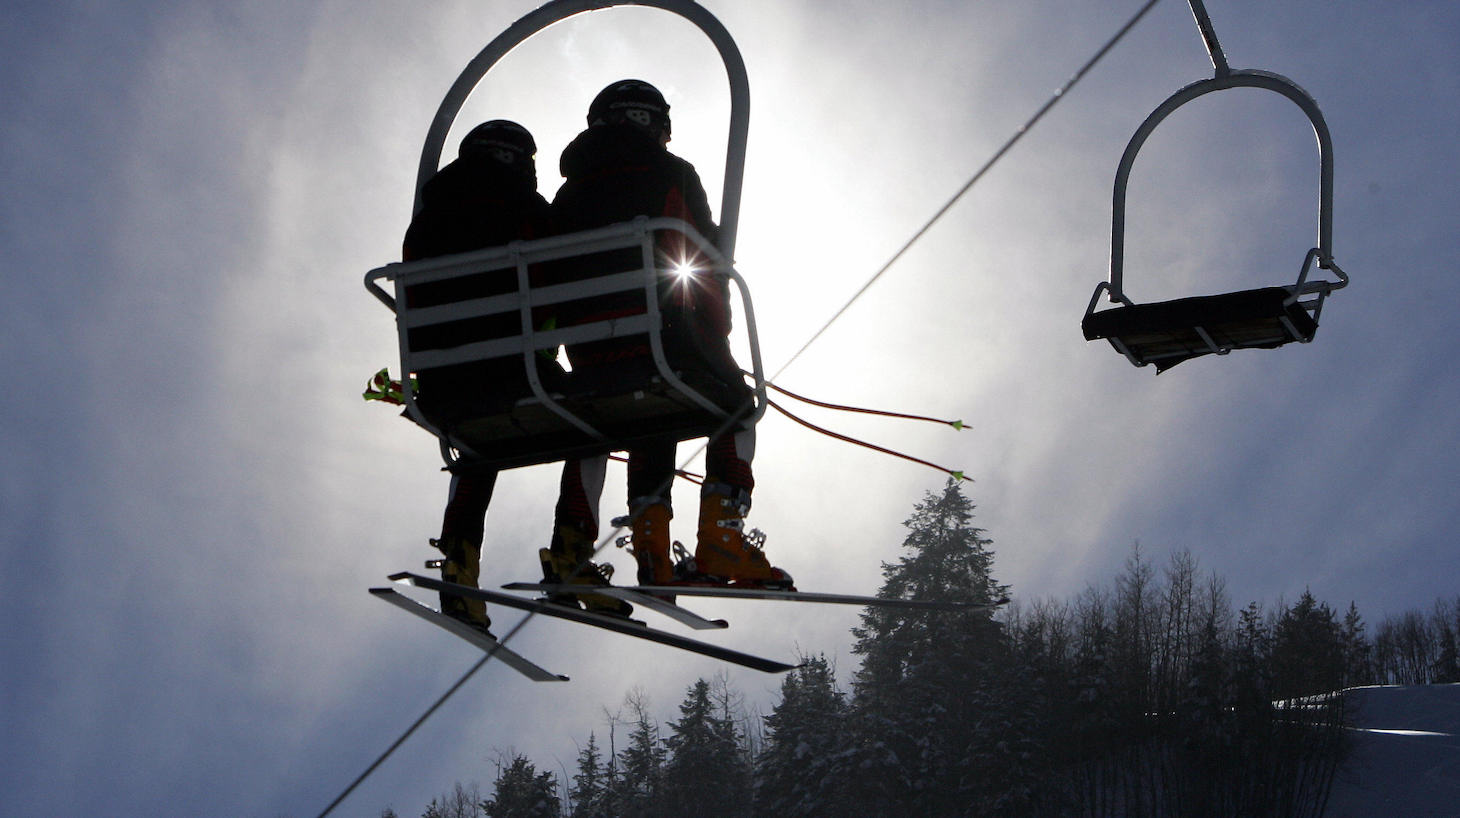 Aspen, UNITED STATES: Ski racers take a chair lift up the hill during a free skiing session 08 December, 2005 in Aspen, Colorado. In cold weather skiers were preparing for the World Cup Super G scheduled for 09 December, 2005 in Aspen. AFP PHOTO/DON EMMERT (Photo credit should read DON EMMERT/AFP via Getty Images)